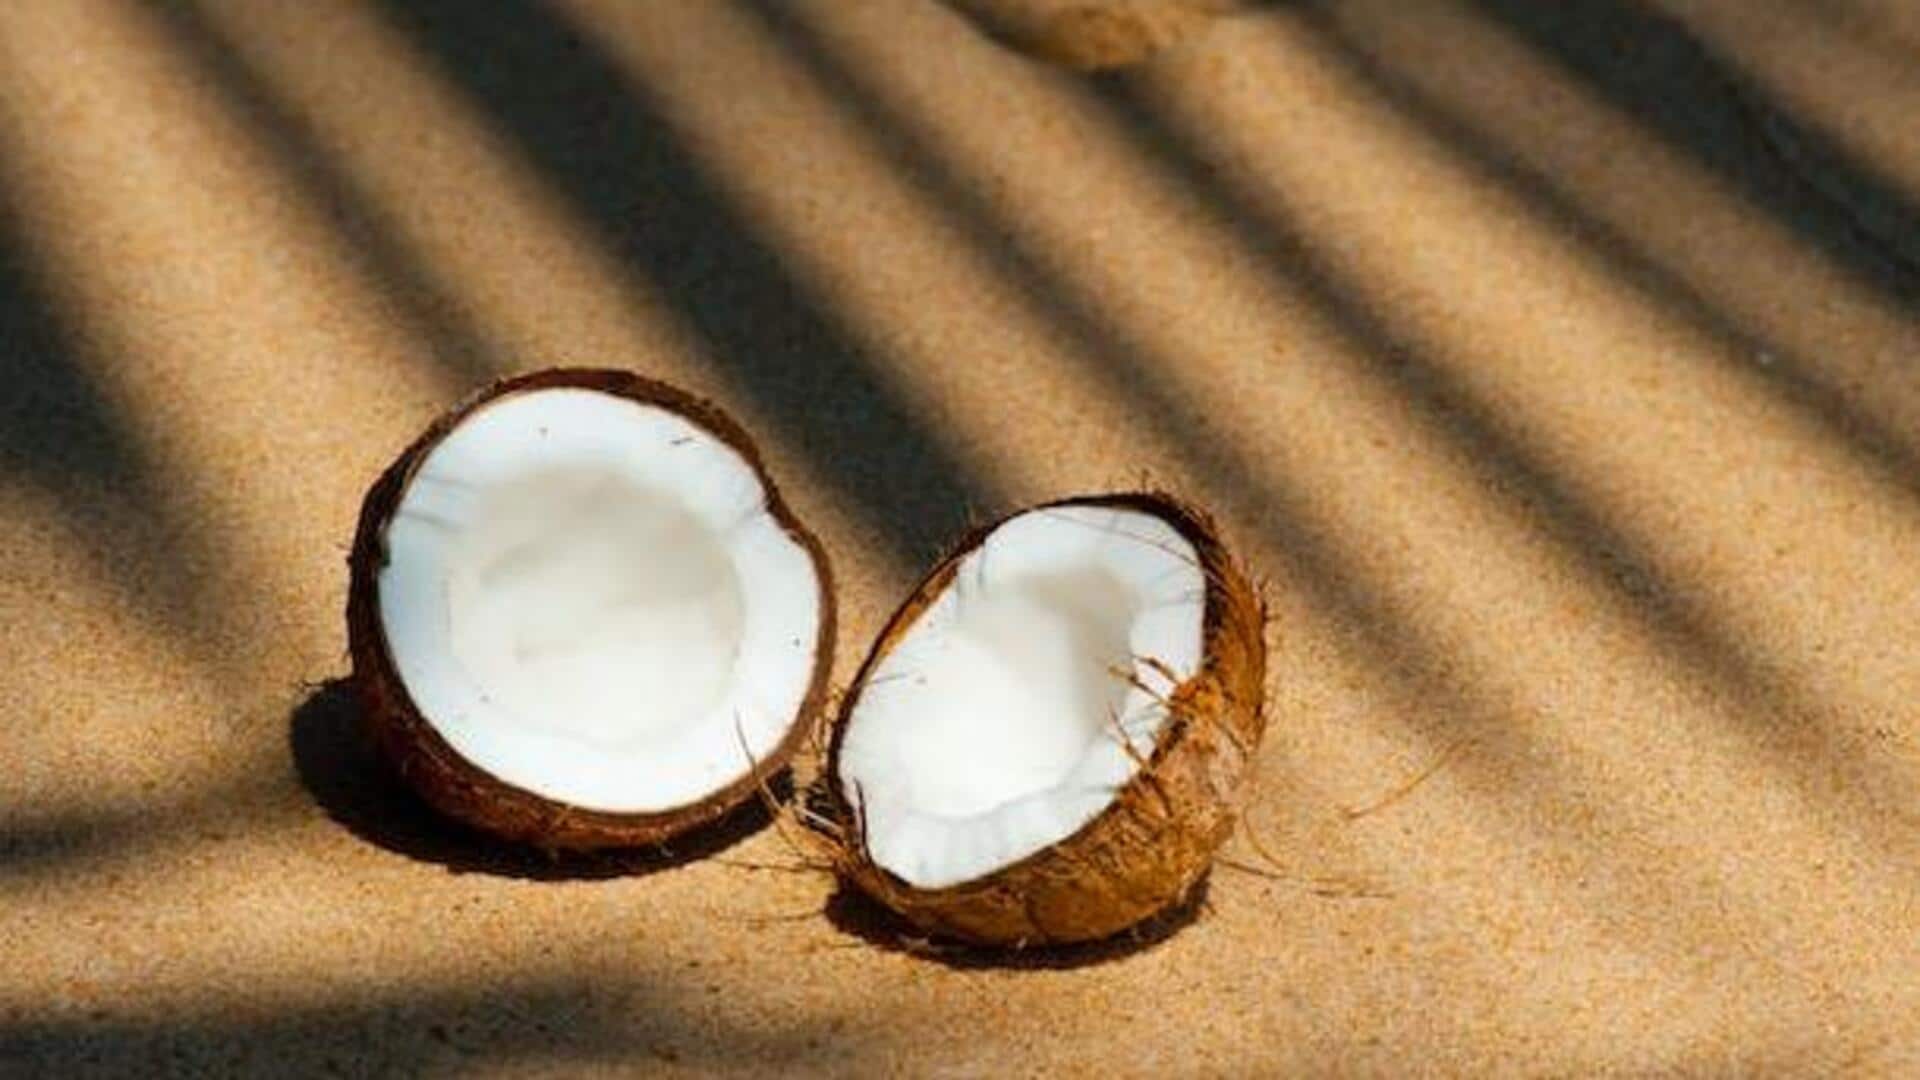 World Coconut Day: Exploring the uses of coconut beyond kitchen